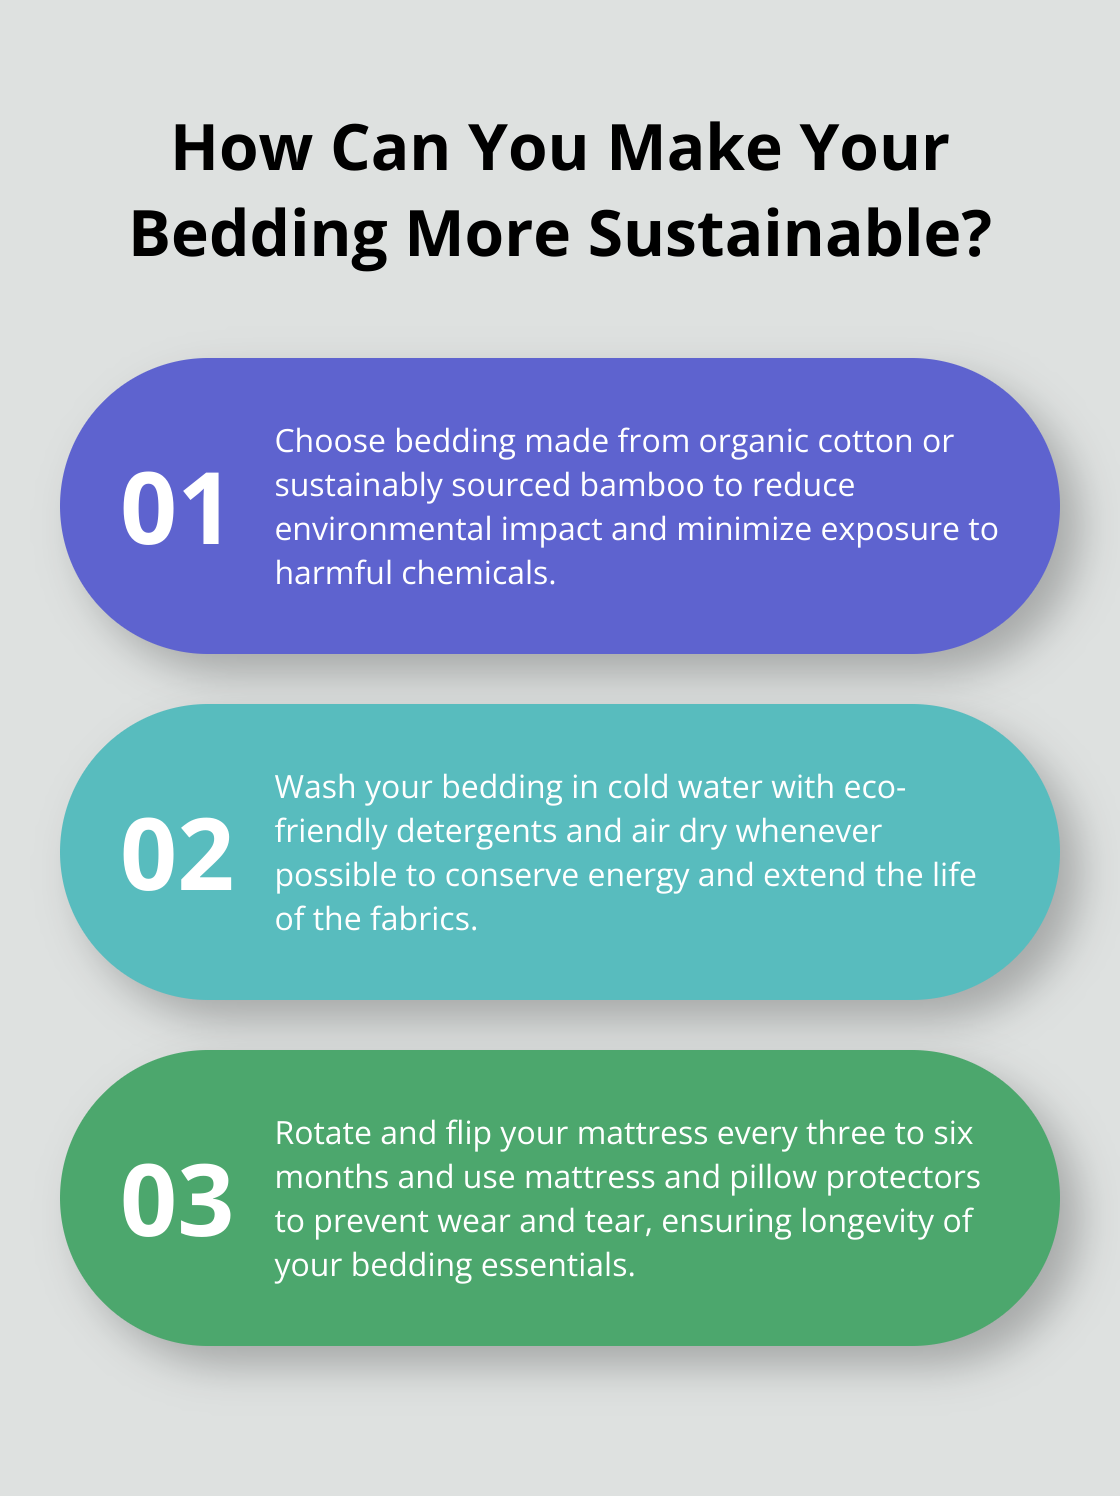 Fact - How Can You Make Your Bedding More Sustainable?